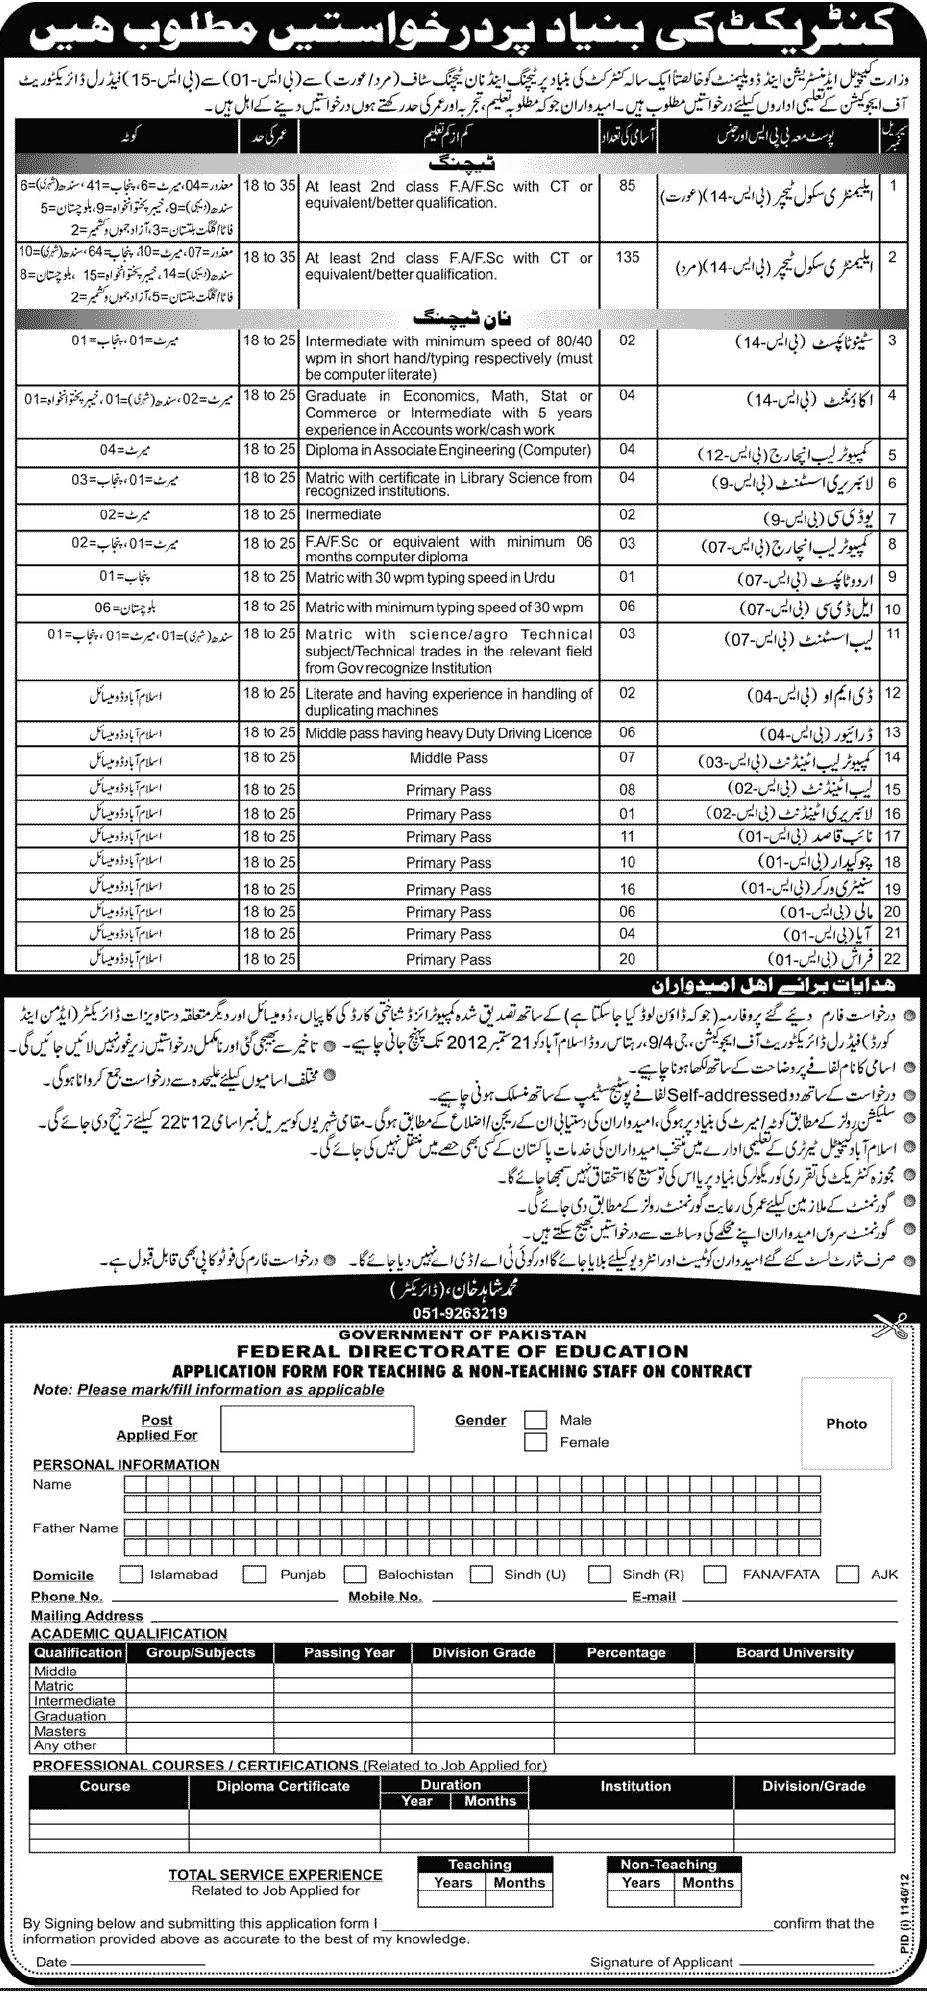 Ministry of Capital Administration and Development Jobs (Government Job)